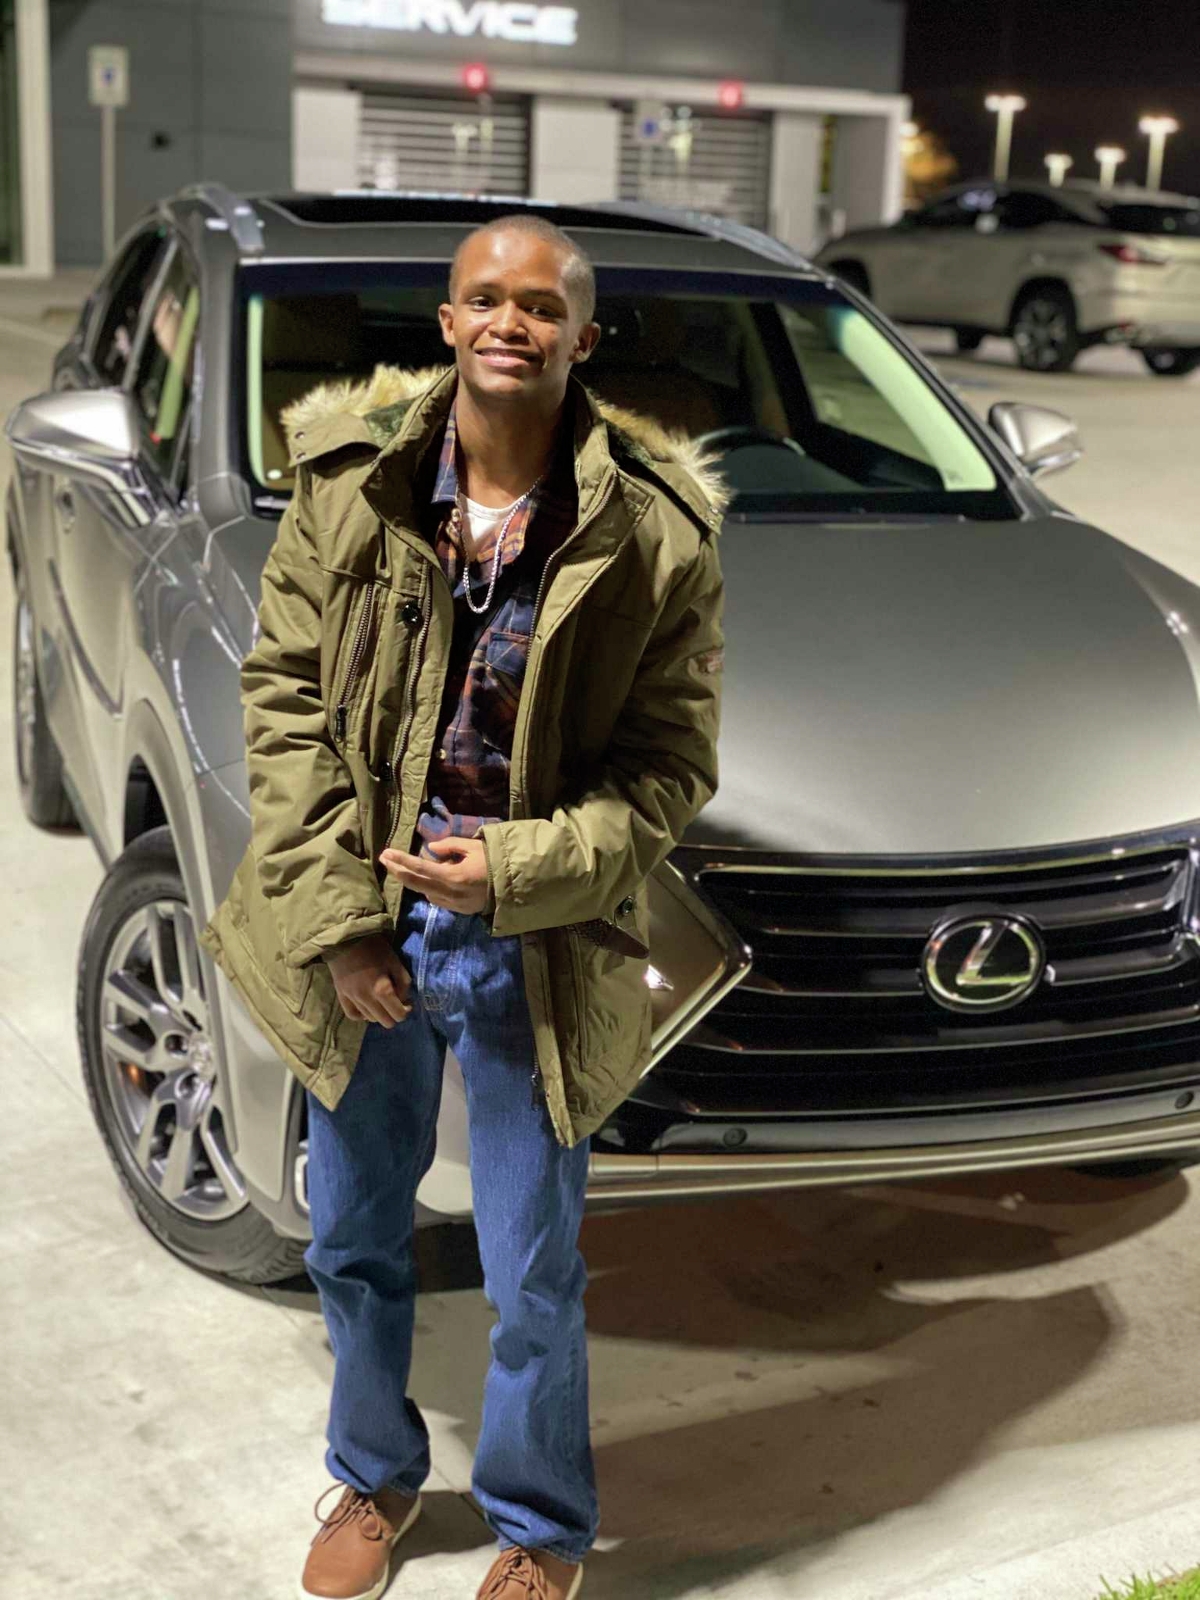 Fred Harris, who had an IQ of 62, stands in front of a Lexus SUV. Fred, who was 19 and had special needs, was killed in an incident with an inmate in the Harris County Jail in 2021.